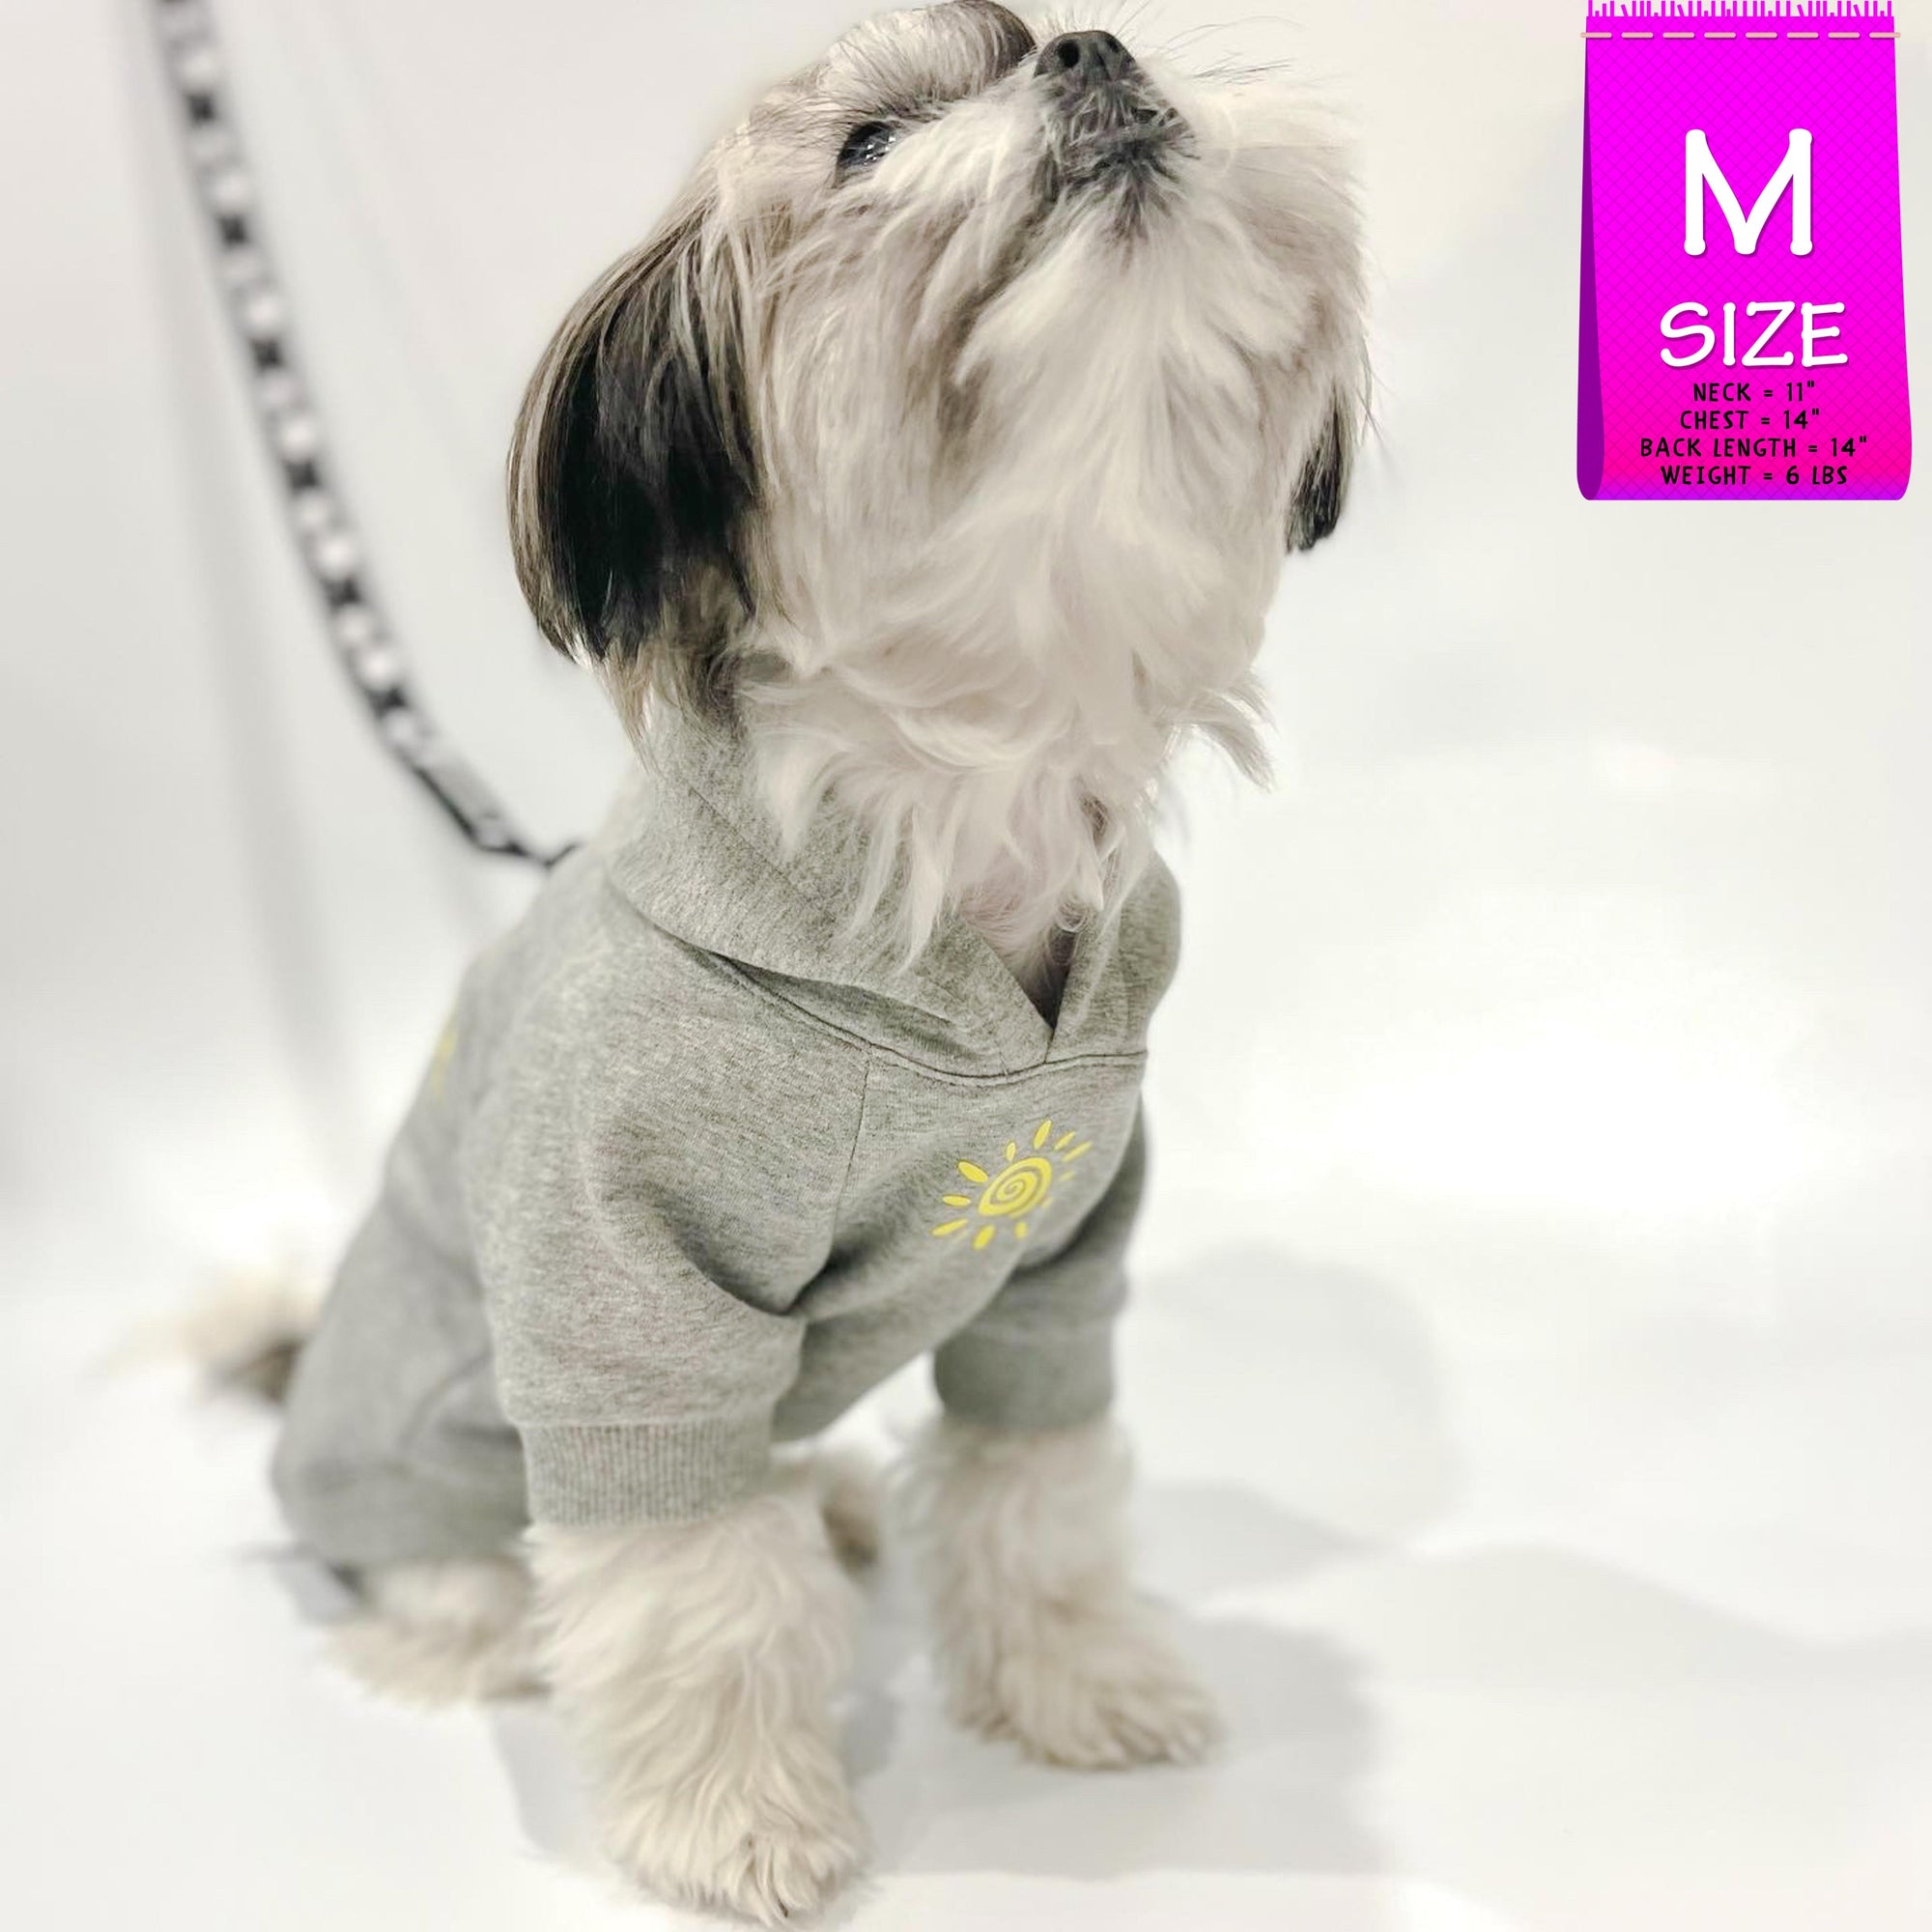 Dog hoodie - Hoodies For Dogs - Shih Tzu looking up wearing &quot;Sunny Days&quot; dog hoodie in gray - front view with modern yellow sunshine emoji and dog leash attached through leash hole - against solid white background - Wag Trendz